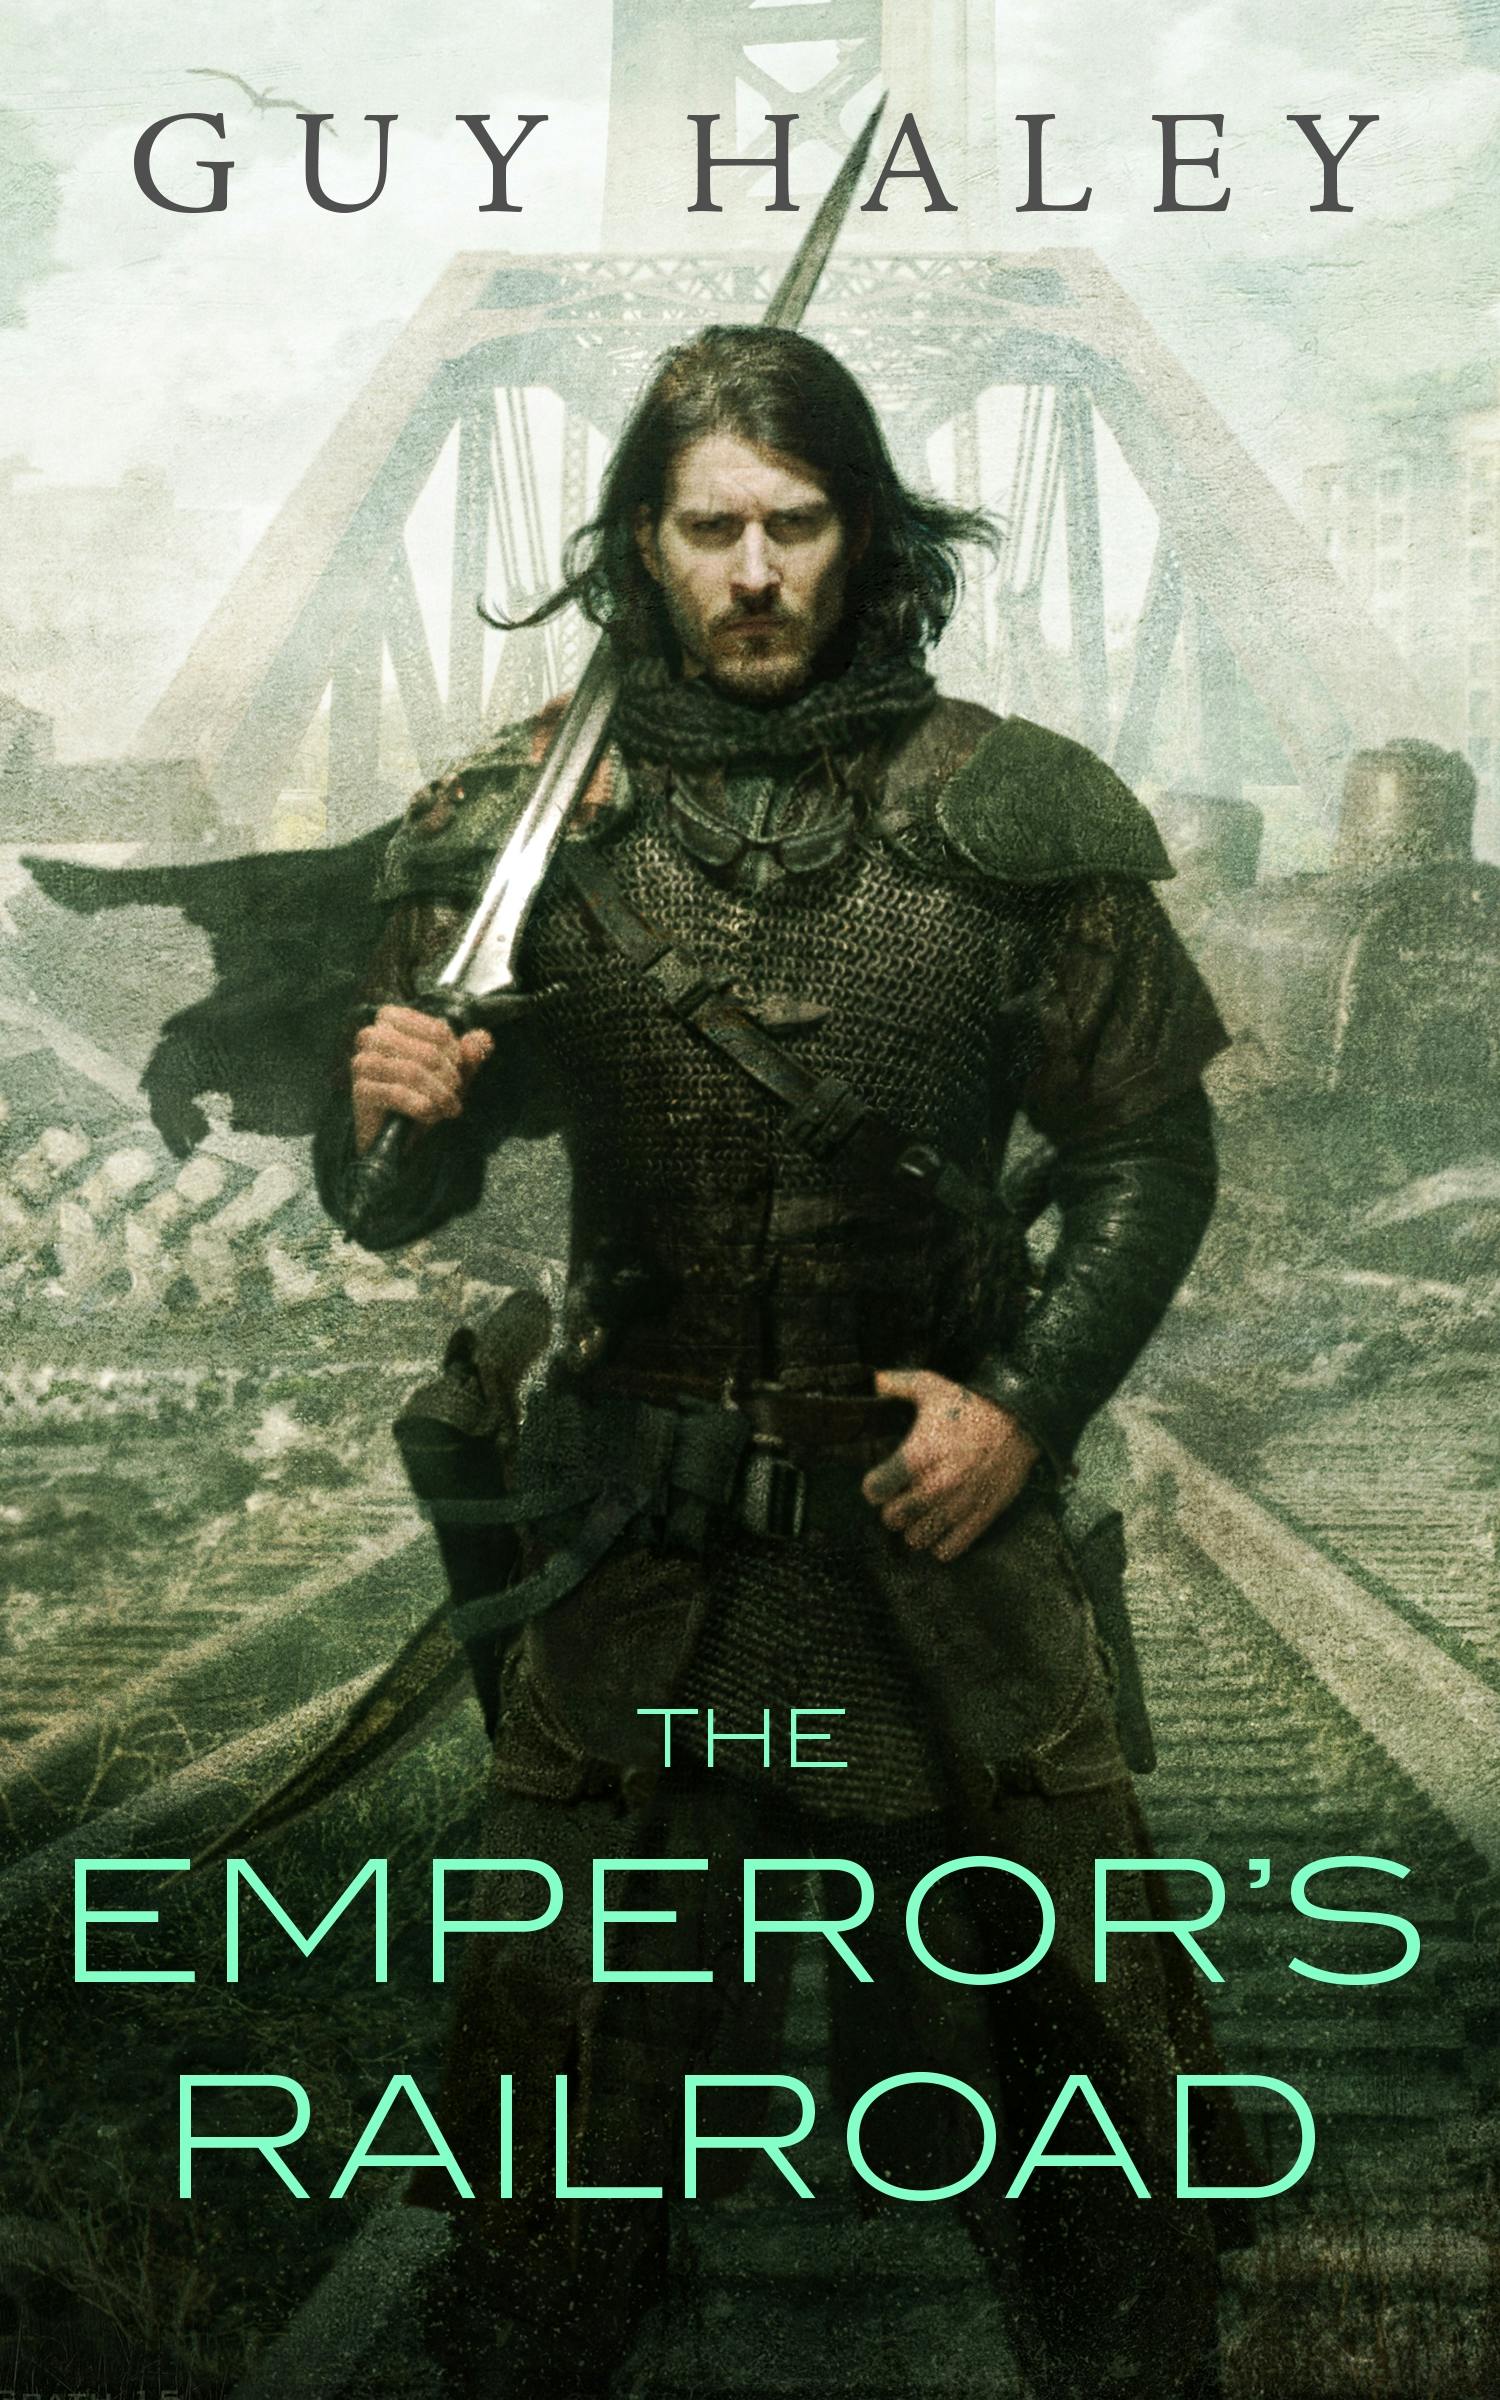 Cover for the book titled as: The Emperor's Railroad